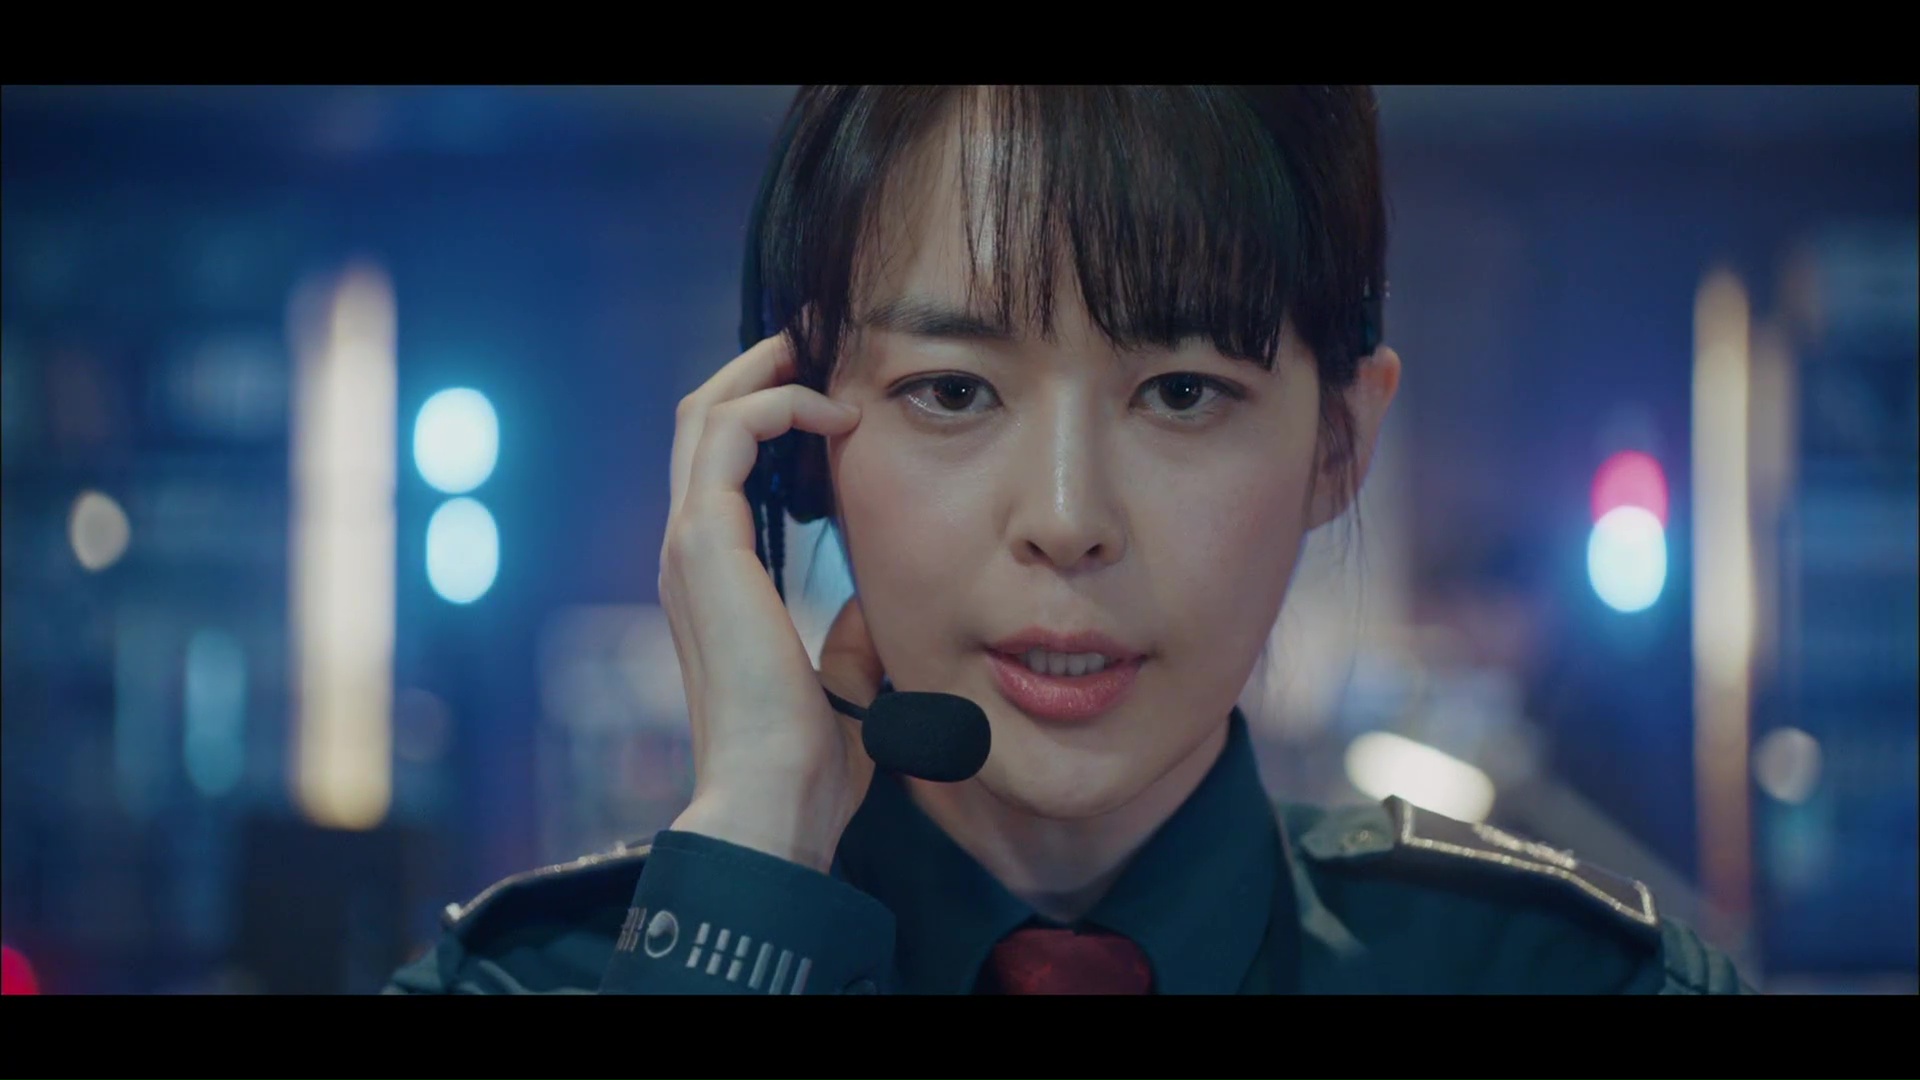 Good Ol’/Check-In Review: Season 1 of OCN’s “Voice” an Origin Story That Stands on Its Own